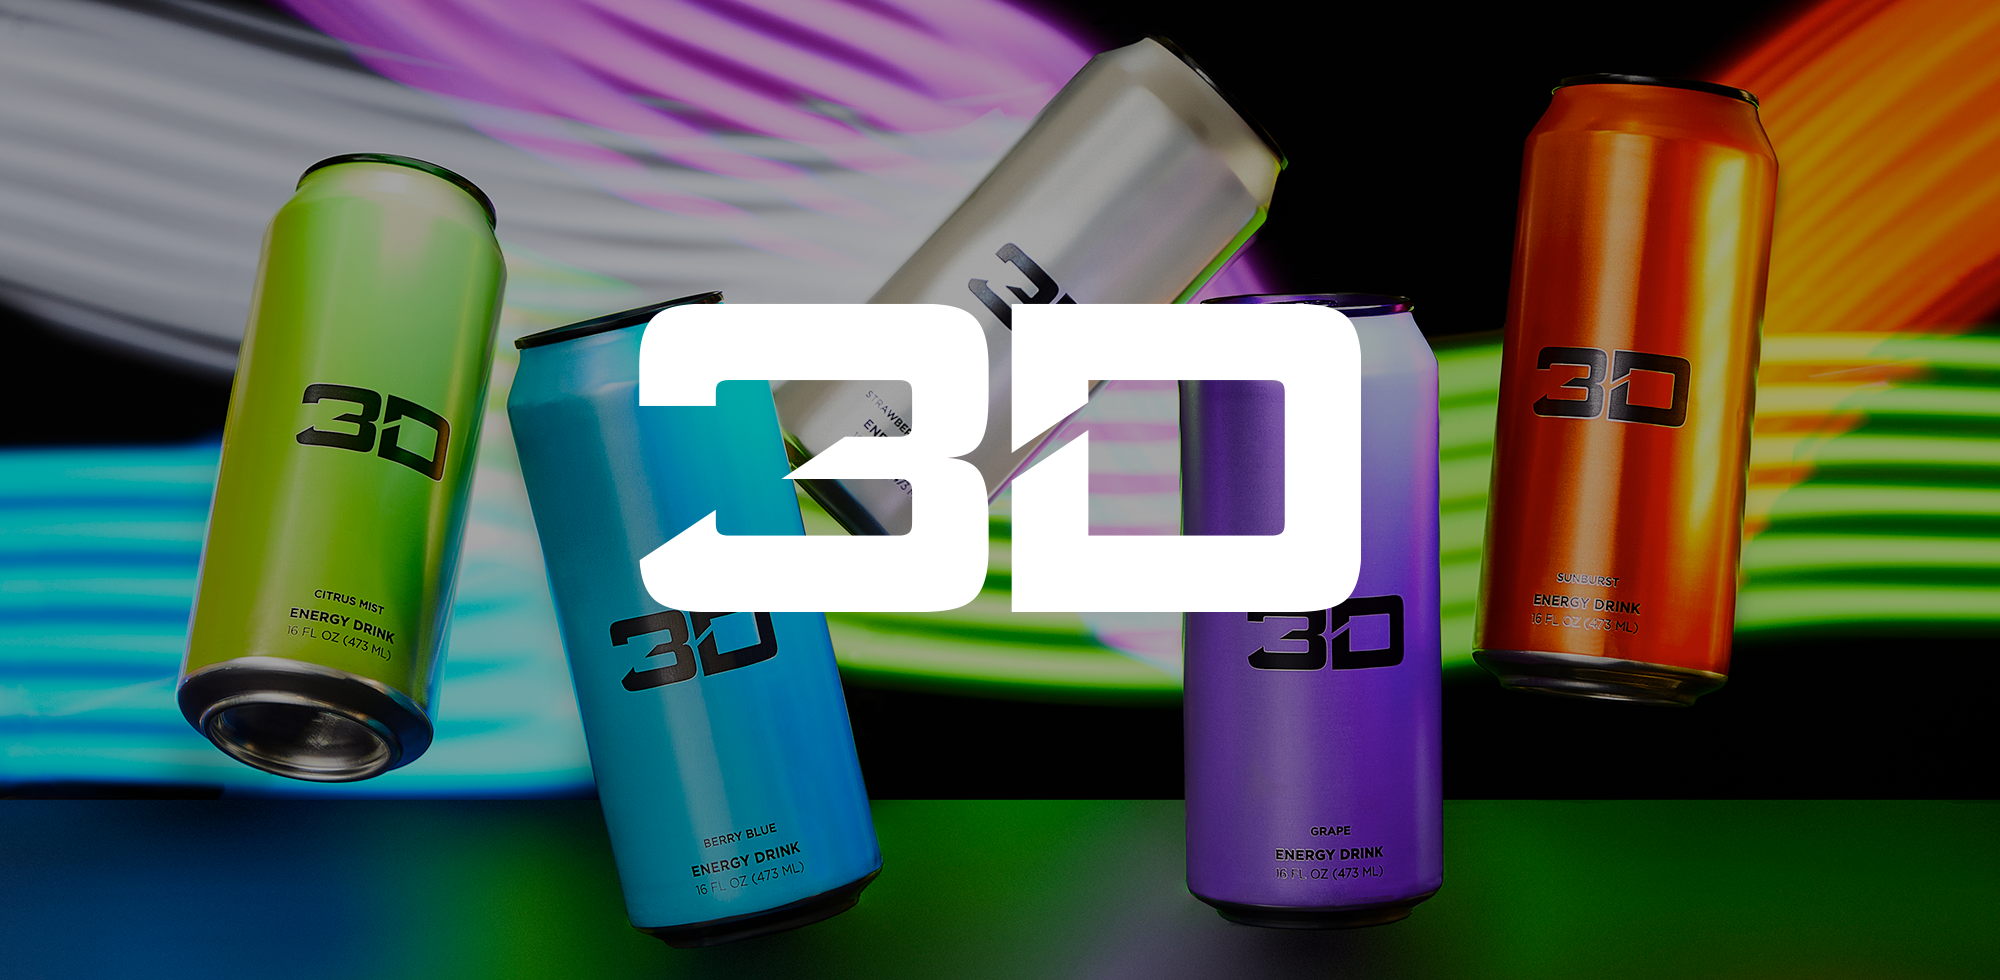 An array of '3D' energy drink cans in various flavors like citrus mist, berry blue, and sunburst, tilted at different angles, with a large '3D' logo in the center, all against a dynamic, colorful, display.